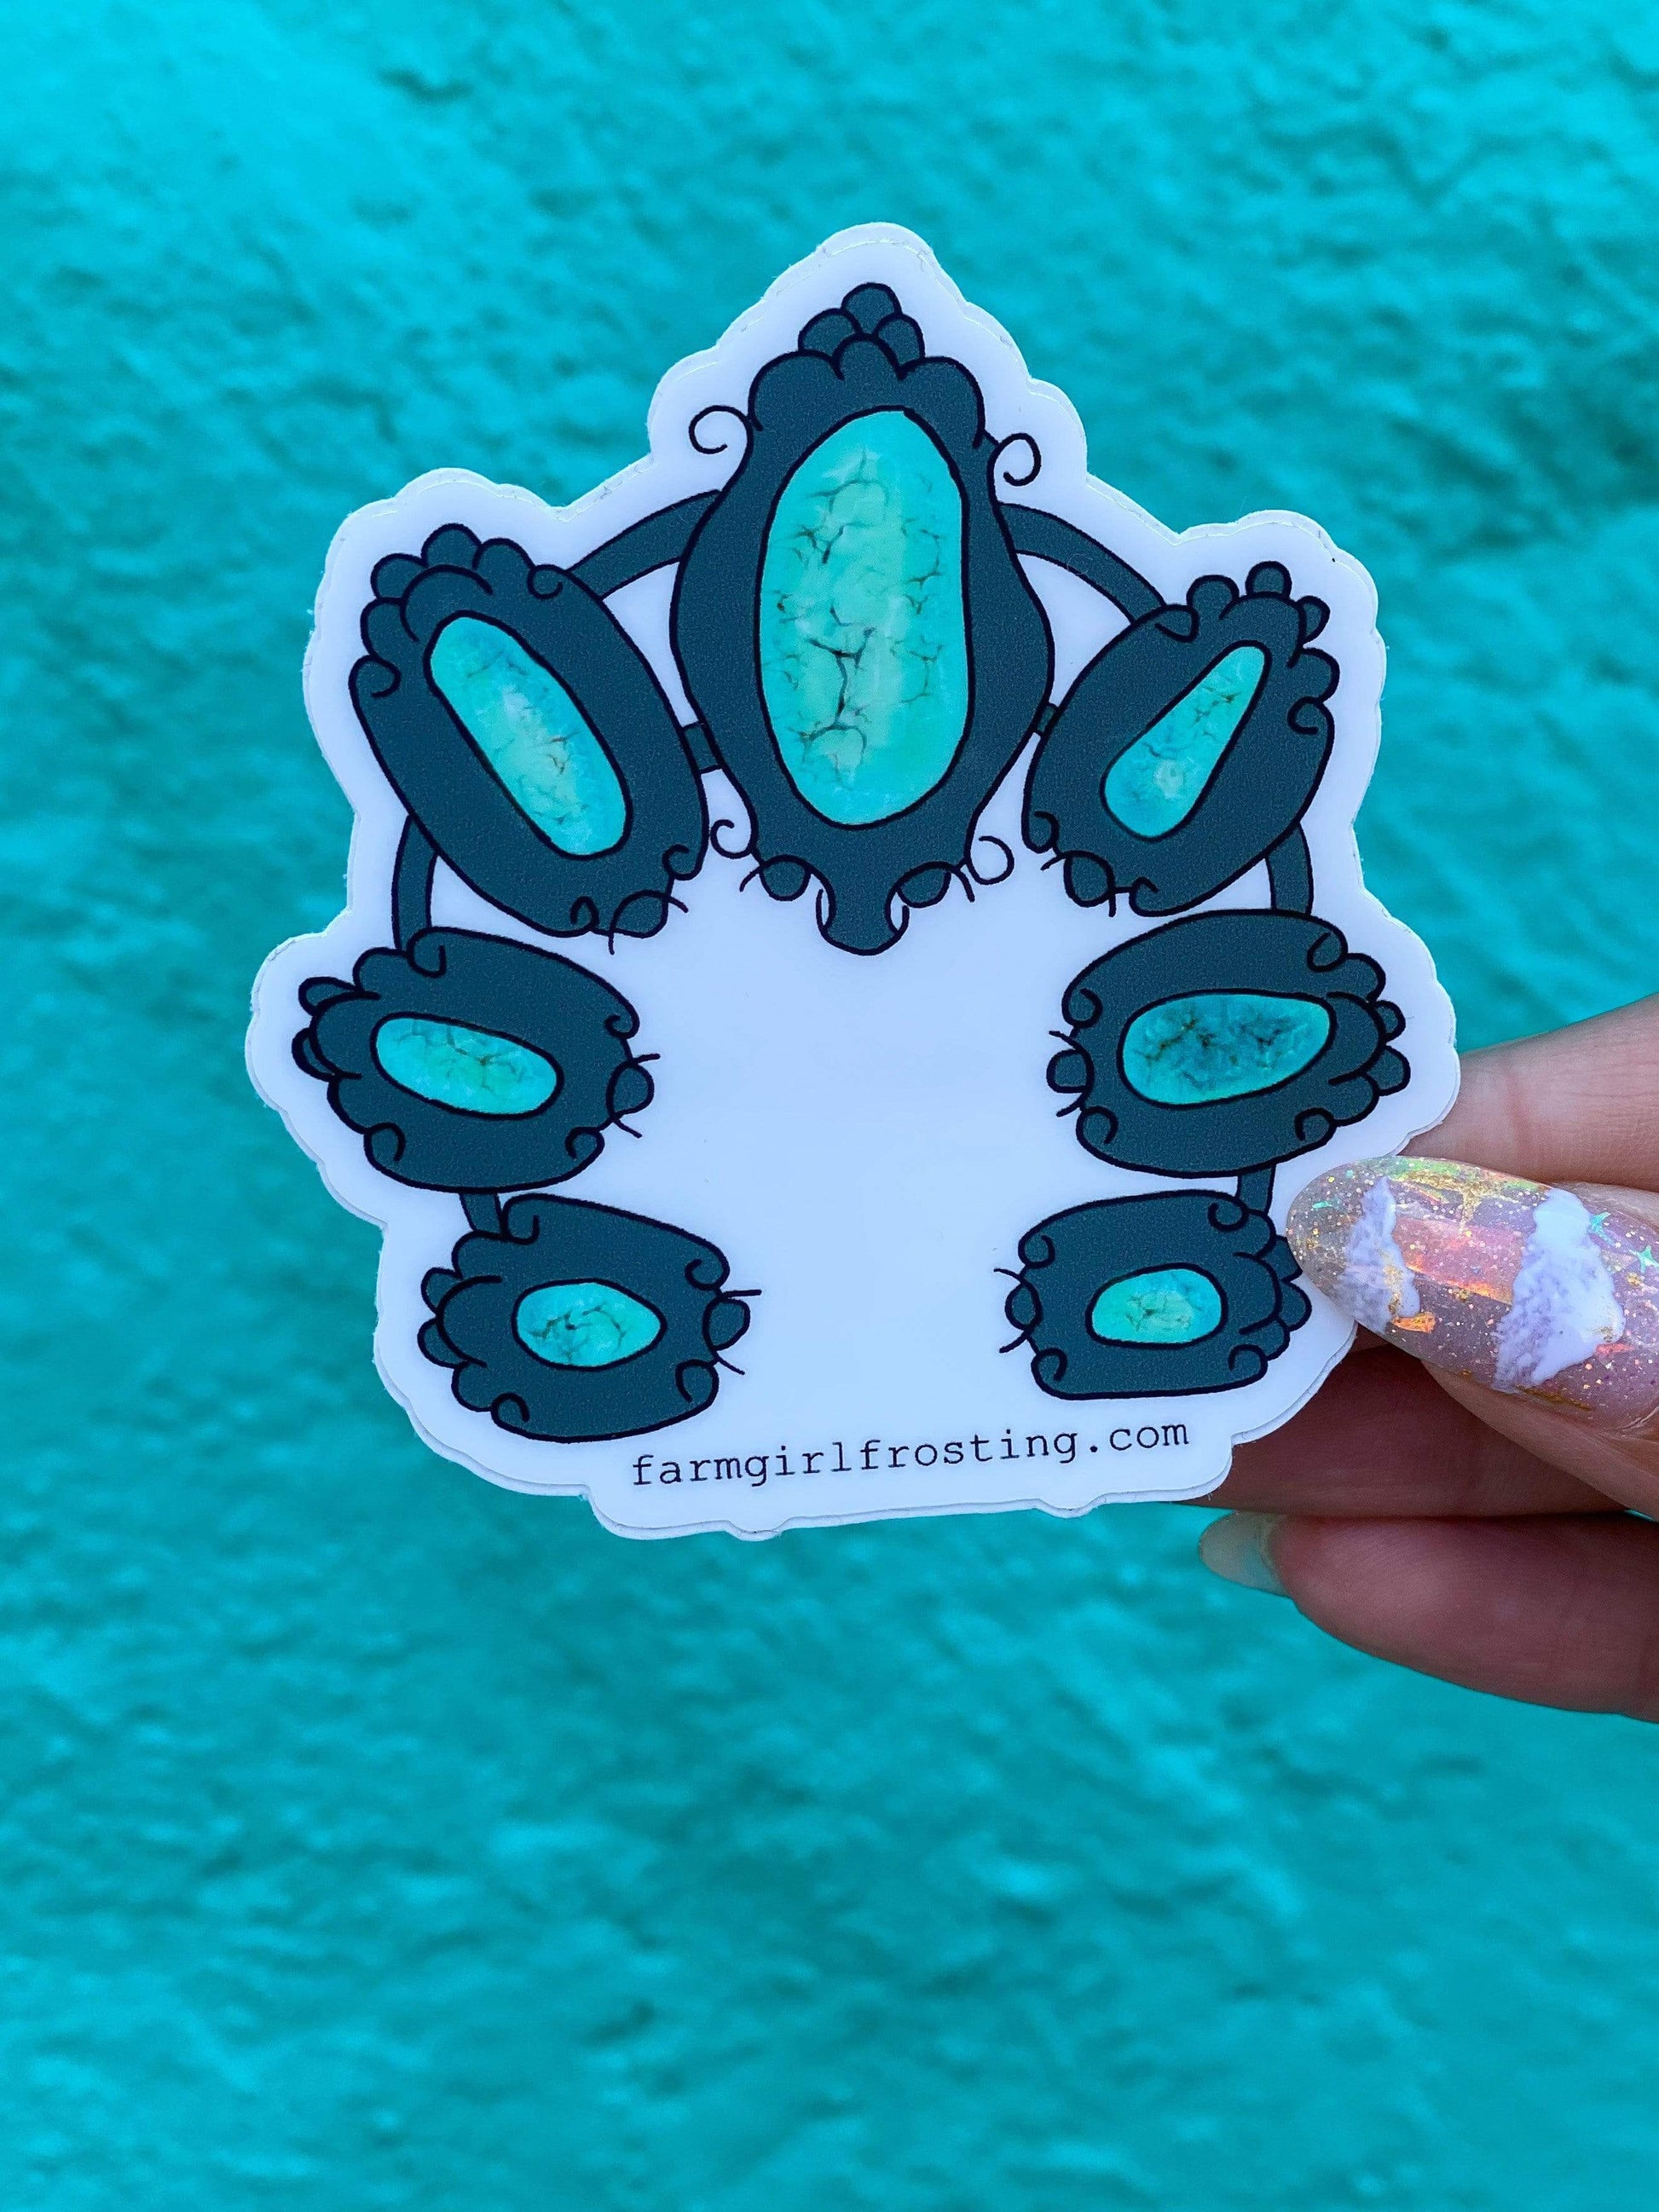 Other Goodies Fun Vinyl Stickers Blossom